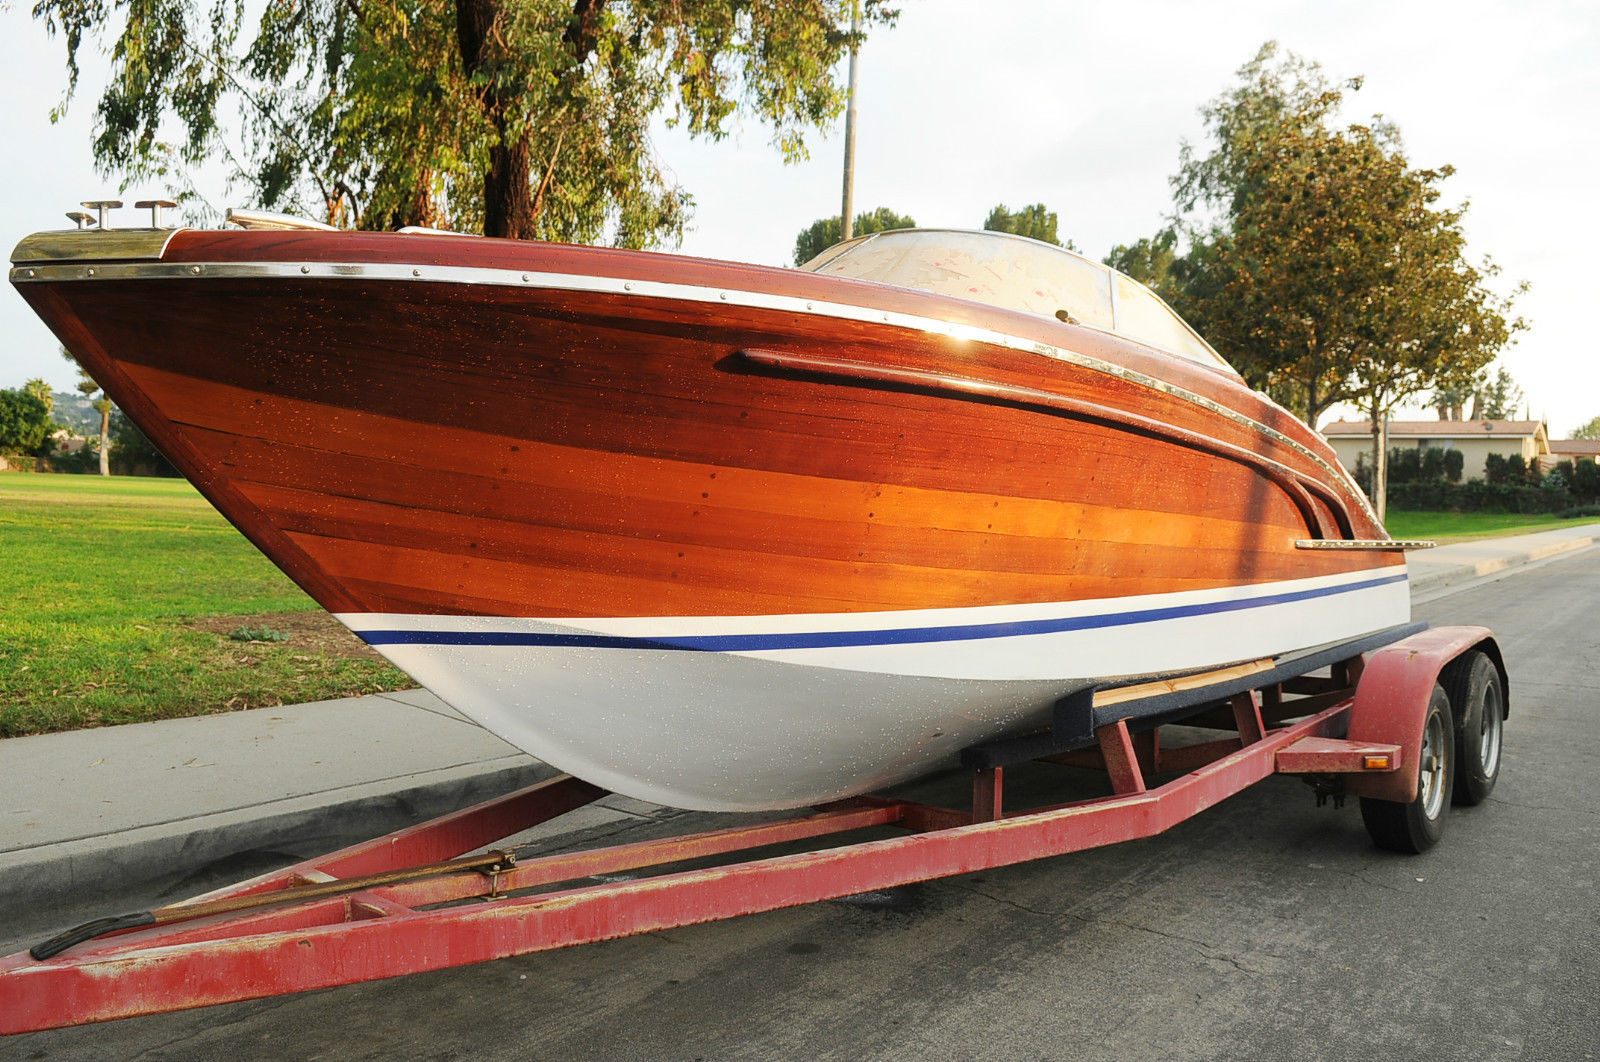 italian wooden speedboat 2012 for sale for $25,000 - boats